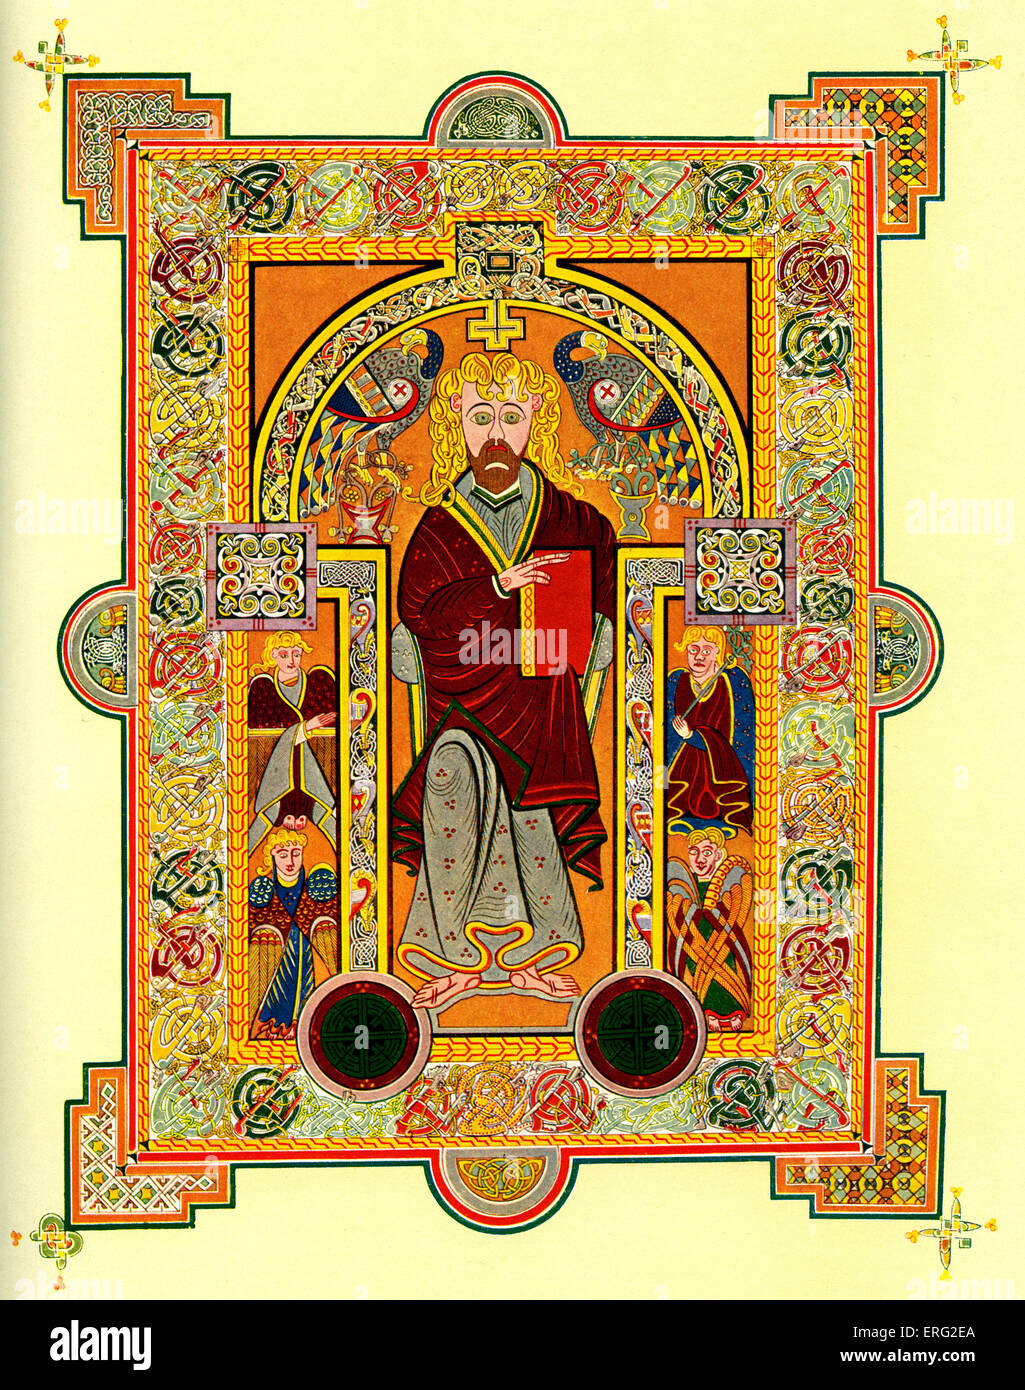 The Book of Kells - Ireland Of The Welcomes